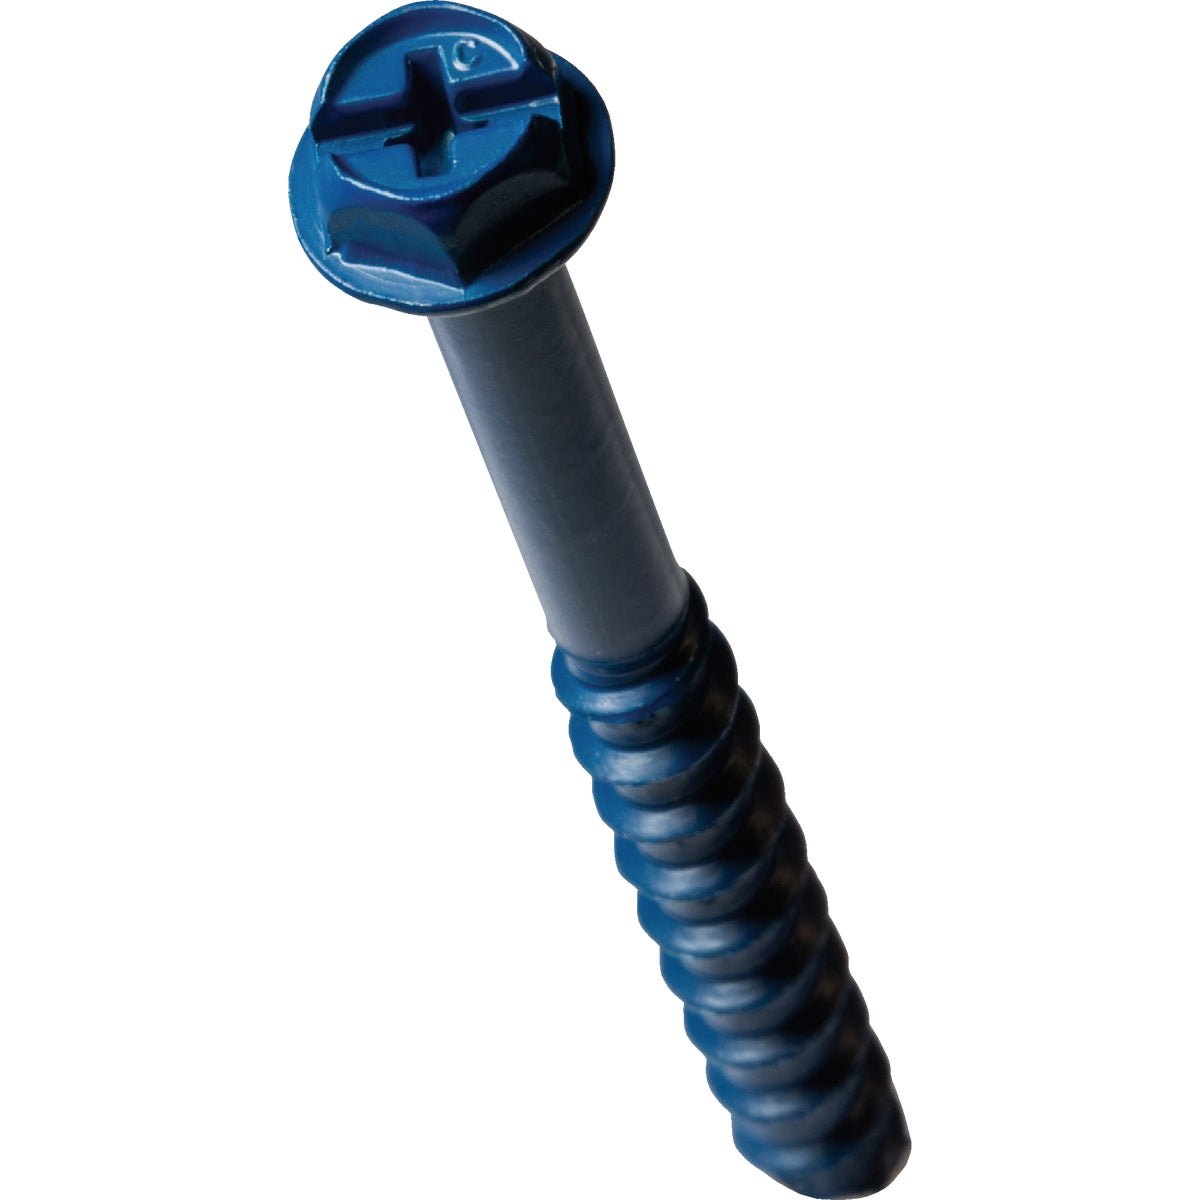 Simpson Strong-Tie Titen Turbo  1/4 in. x 2-3/4 in. Hex-Head Concrete and Masonry Screw, Blue (100-Qty)